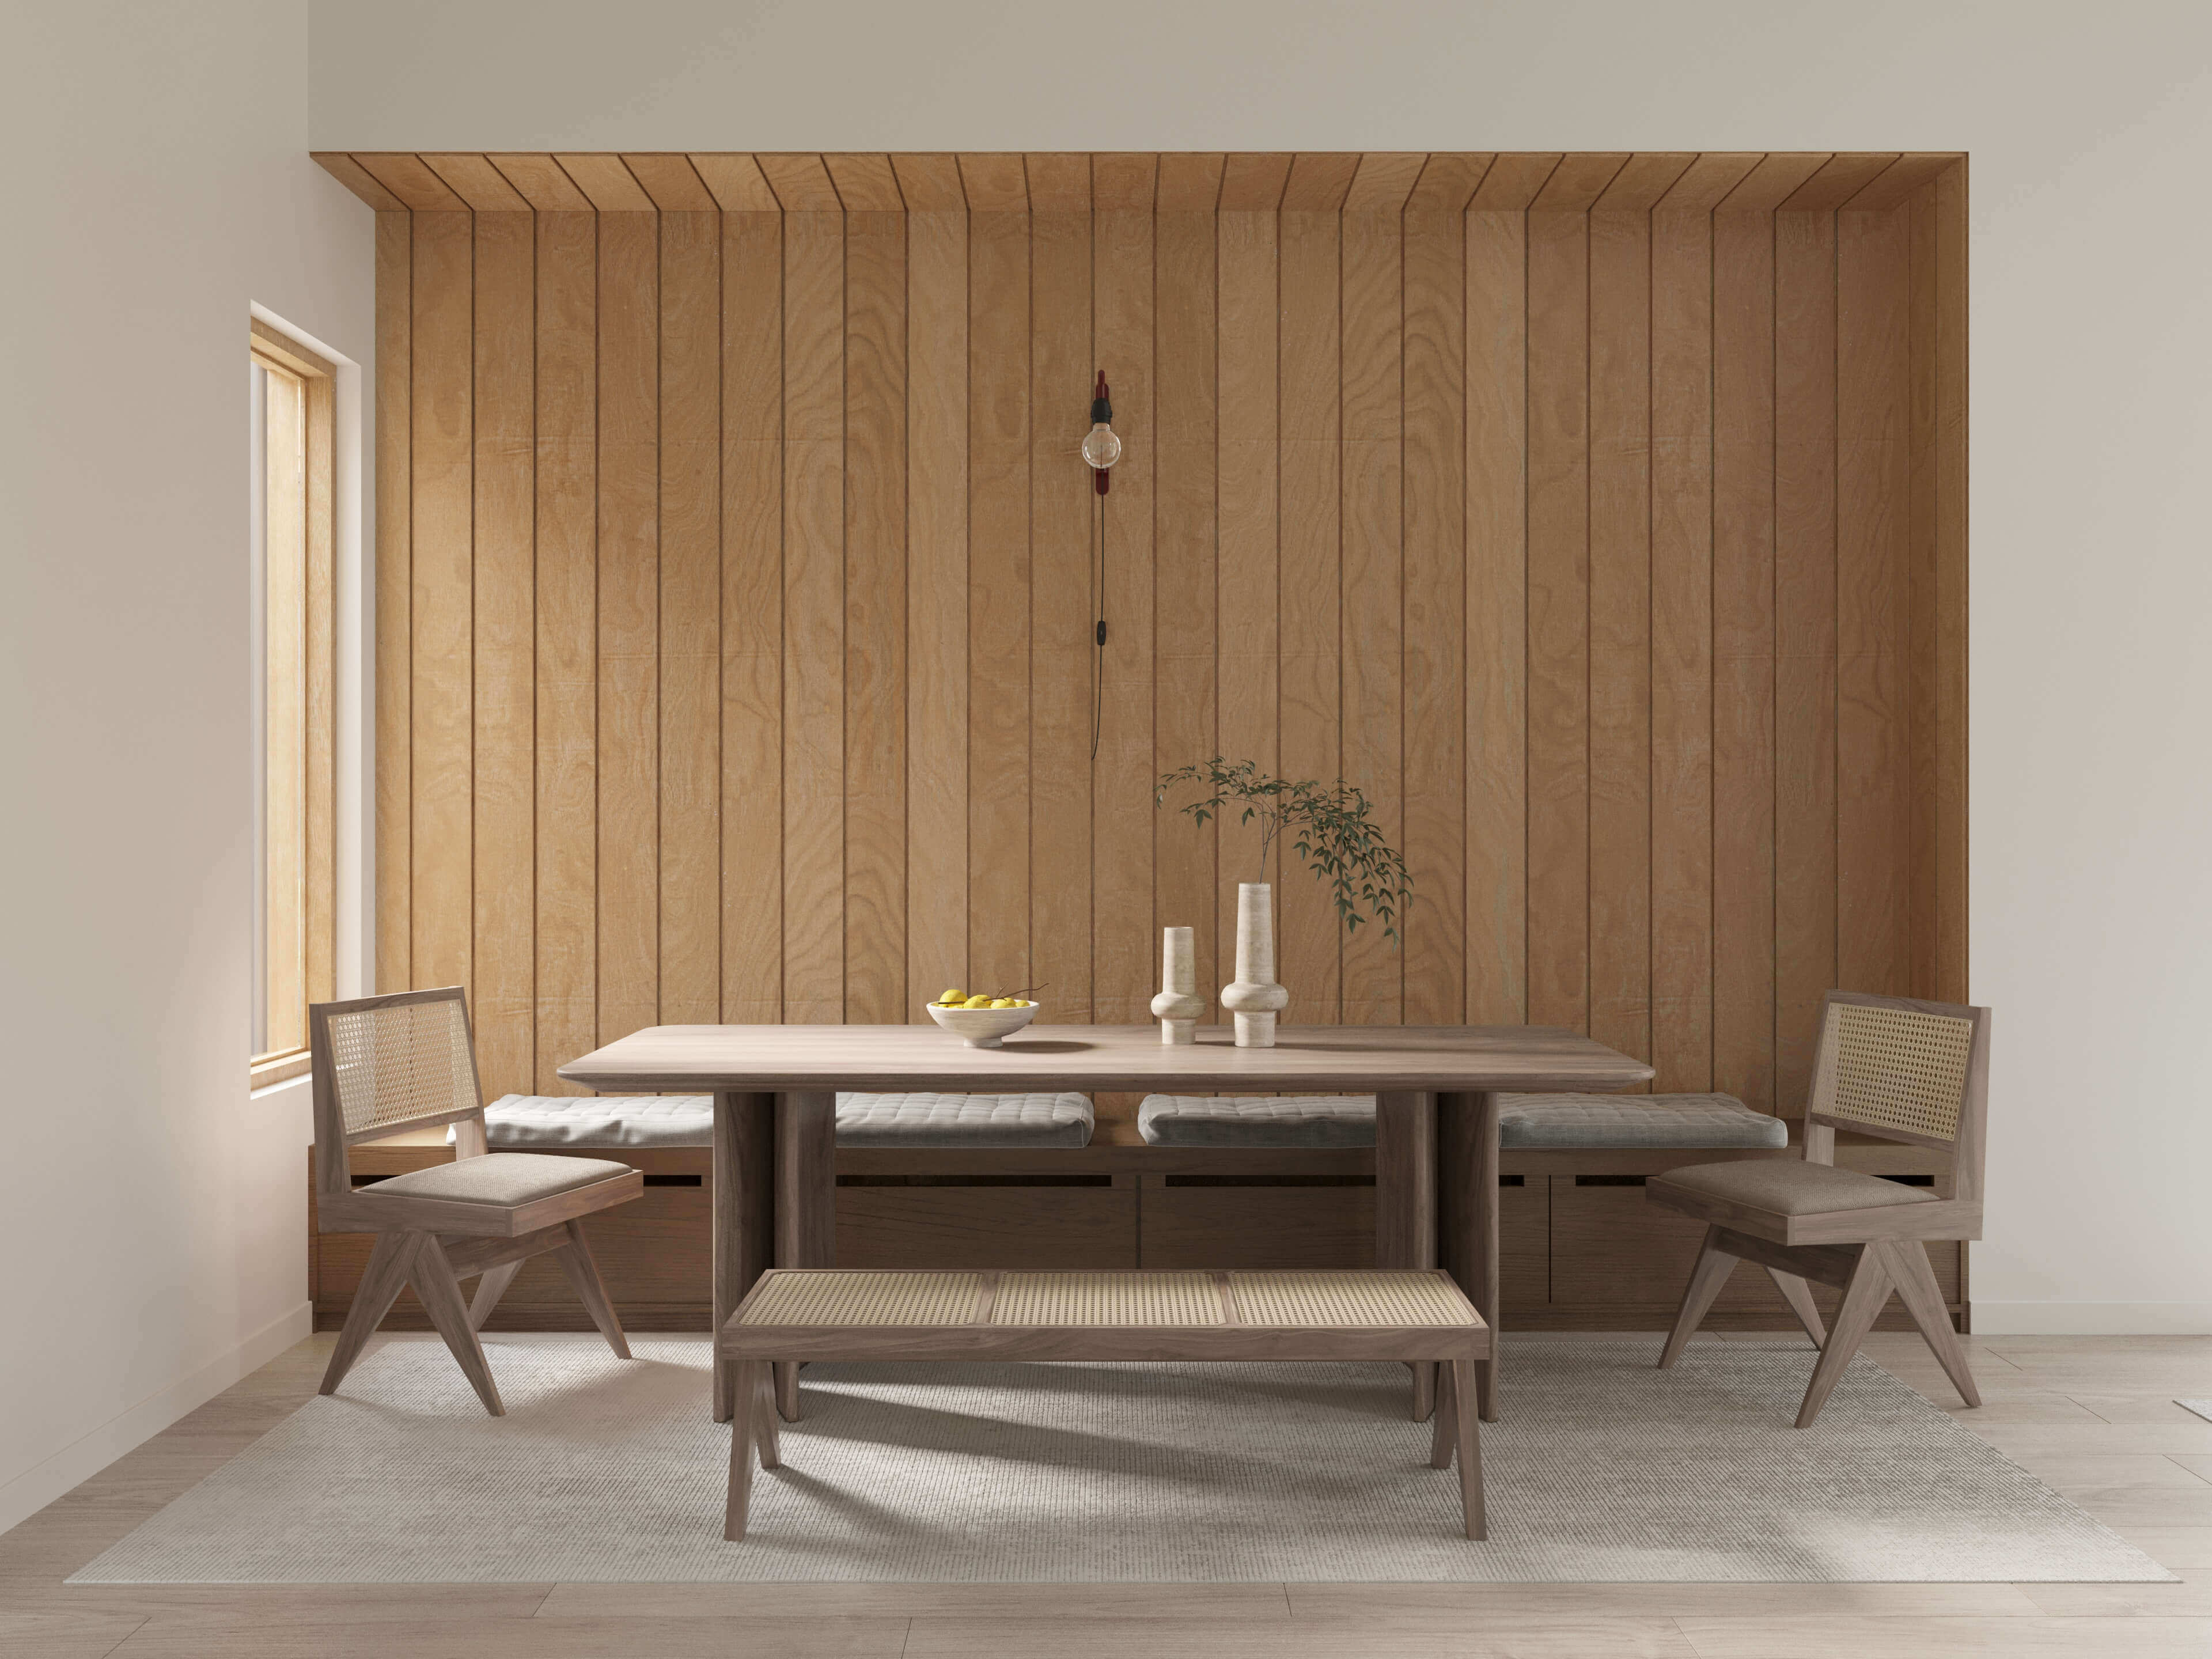 barndominium plans: DWF Twin Home Dining Interior with wood accents and furnitures